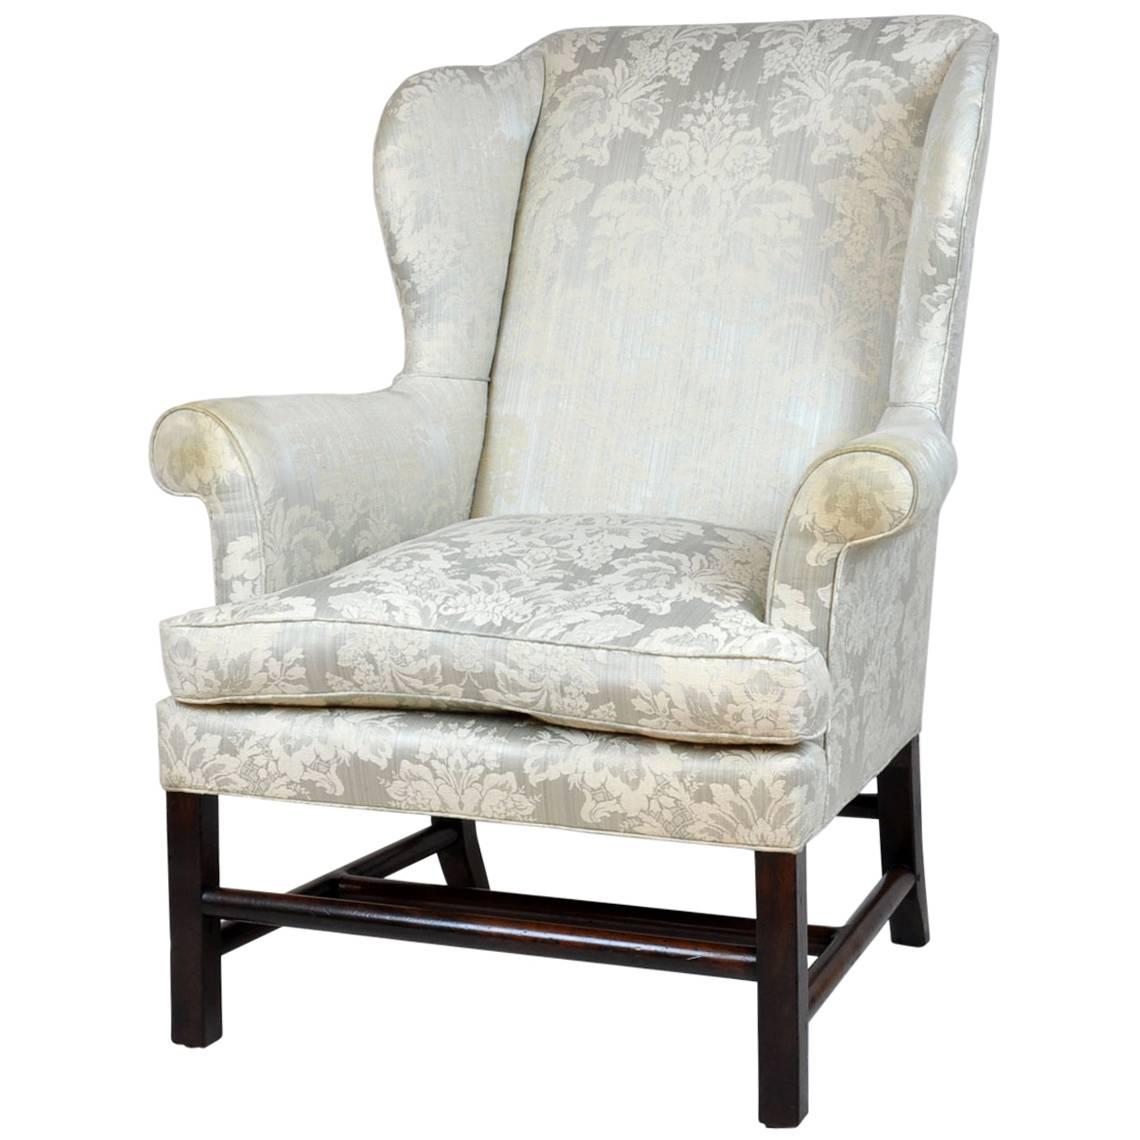 Georgian English Rolled Arm Wing Chair with Unusual Turned Stretcher, 1790s